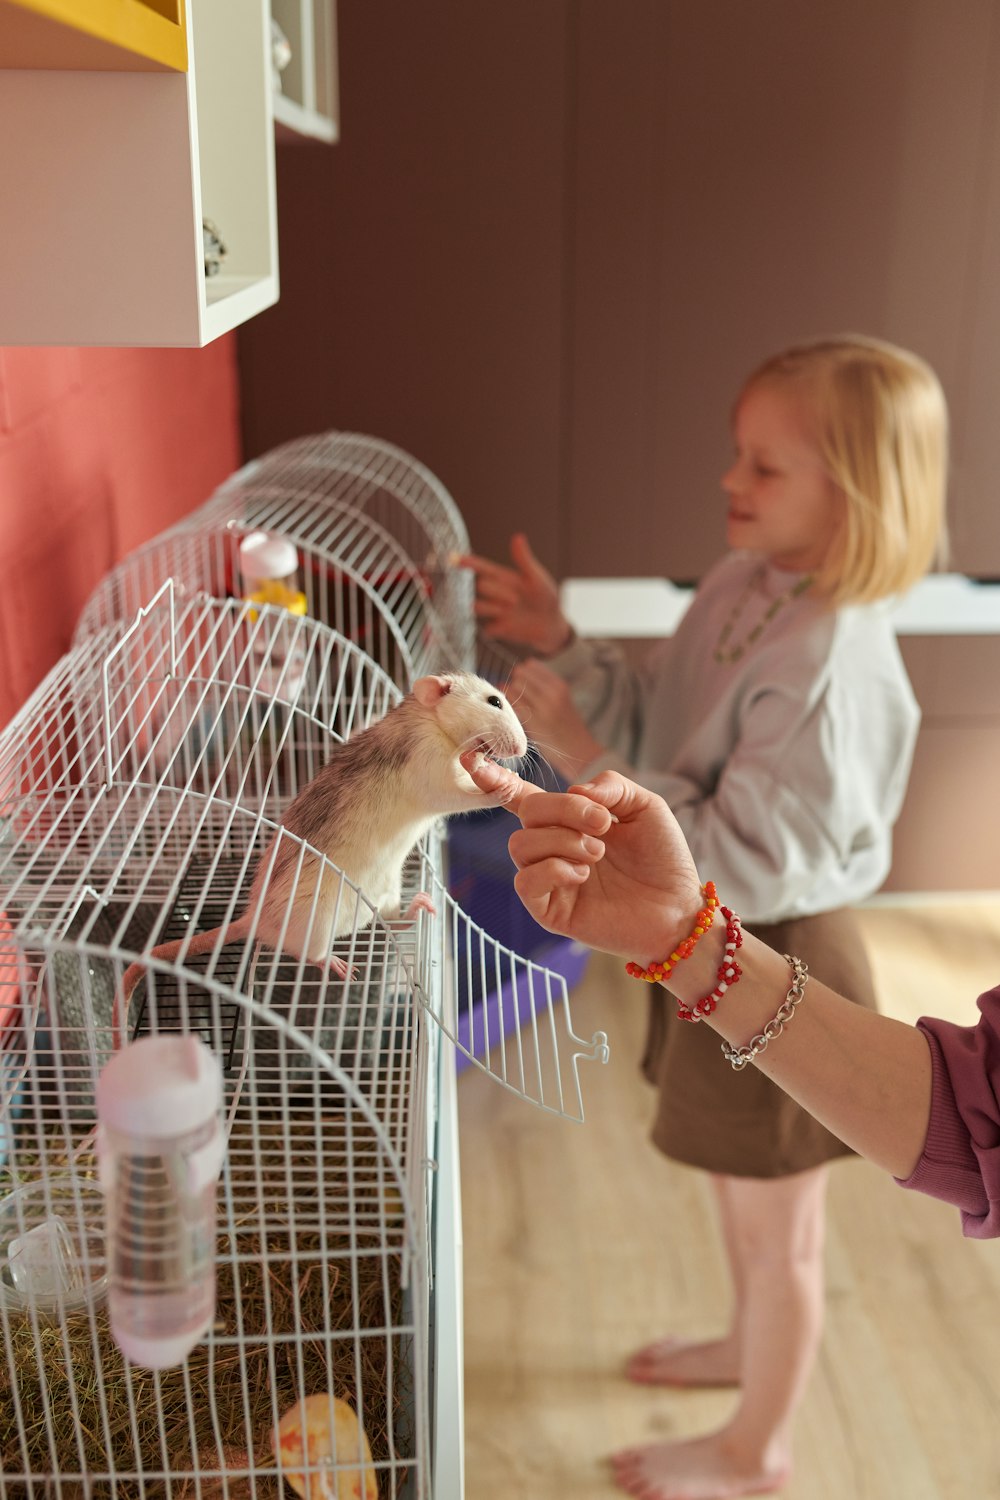 a woman feeding a small rodent in a cage